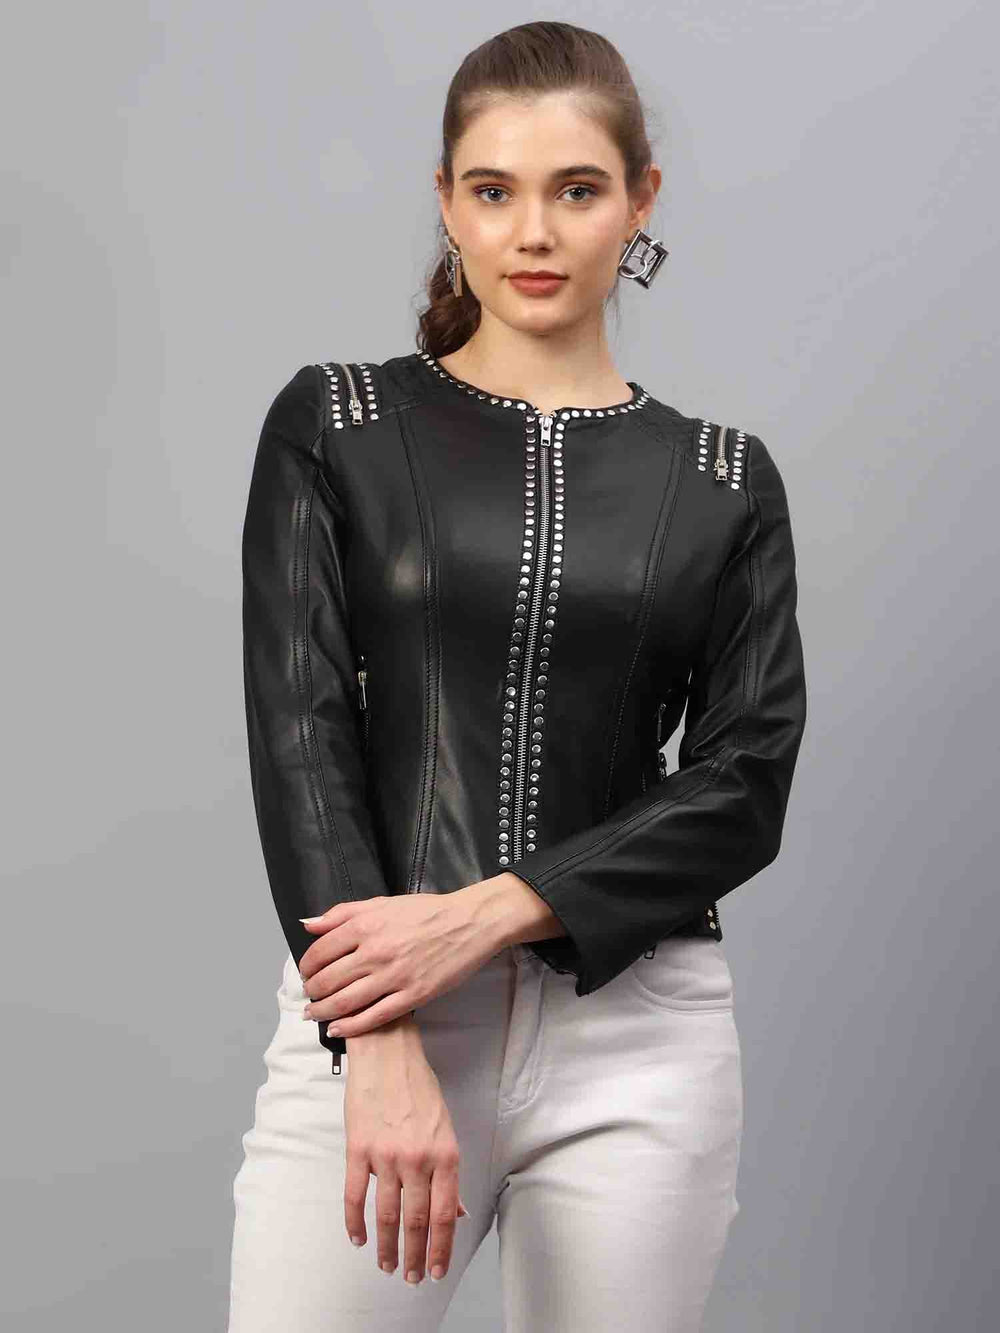 Make a statement with the Saint Bethany Studded Leather Jacket - a must-have in your wardrobe